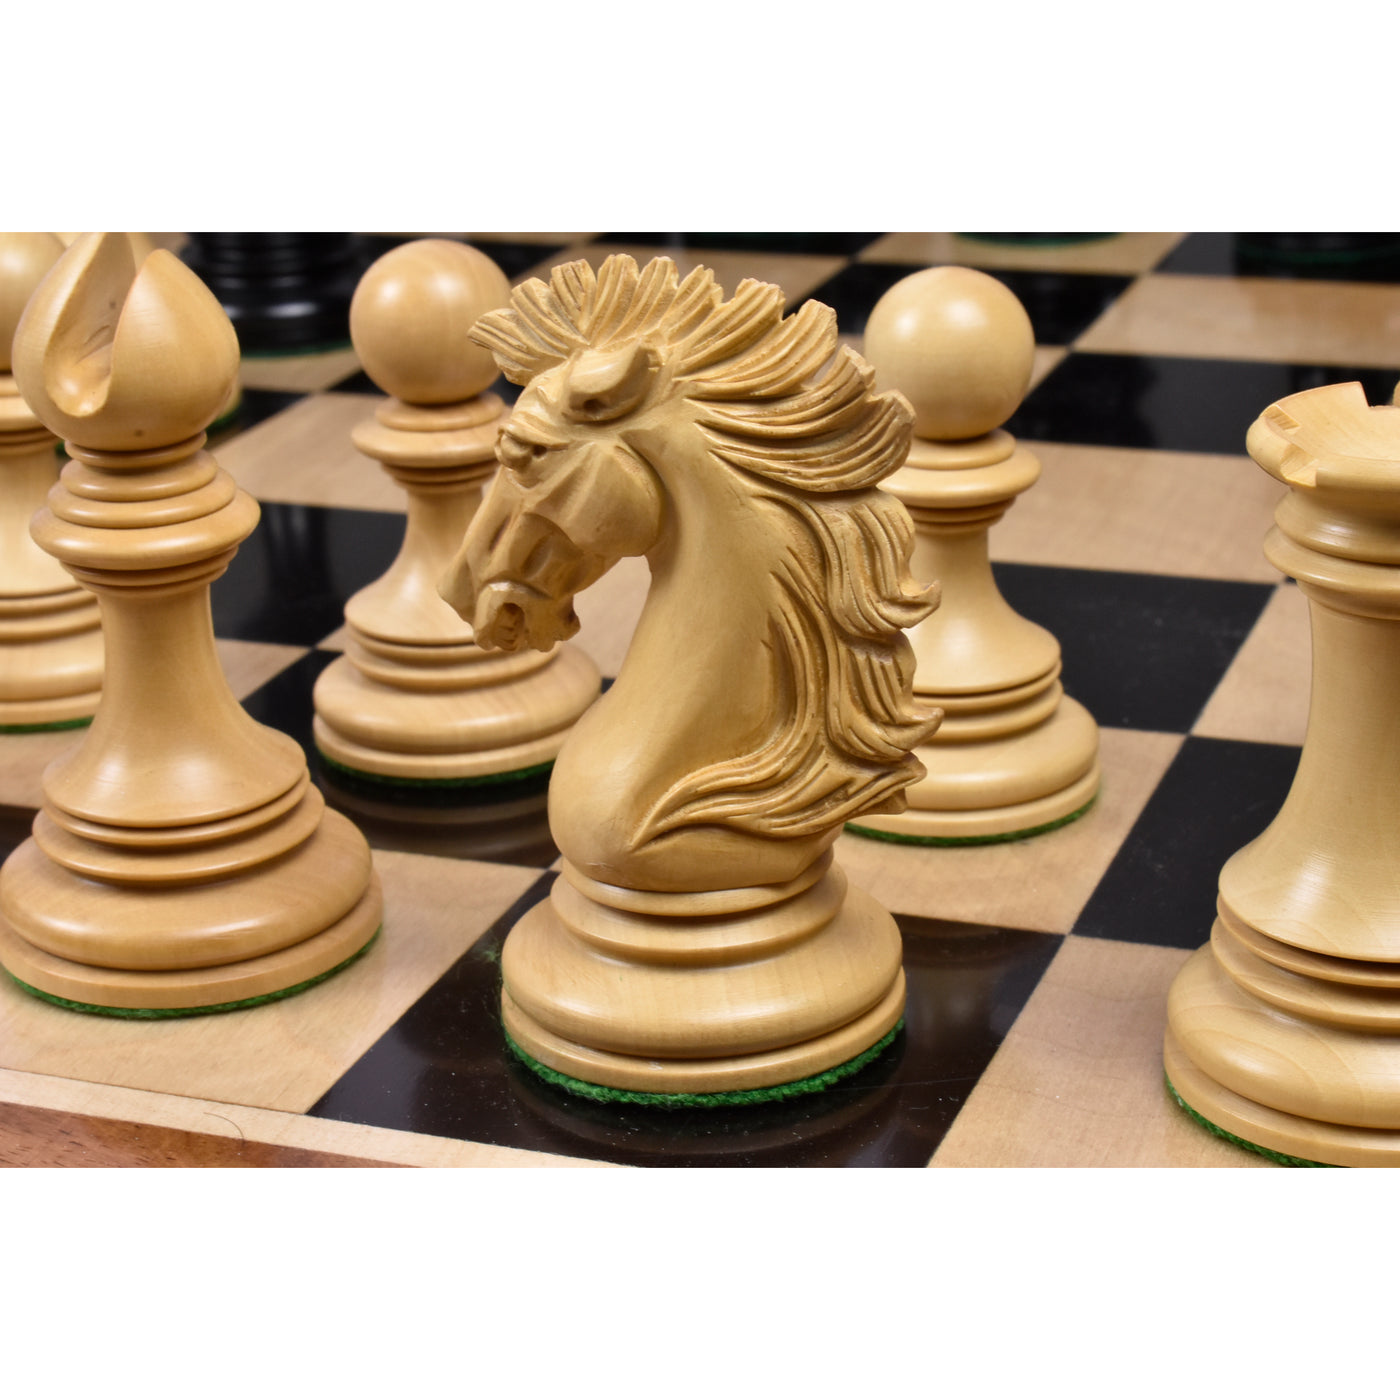 Slightly Imperfect Alexandria Luxury Staunton Chess Pieces Only Set - Triple Weighted - Ebony Wood